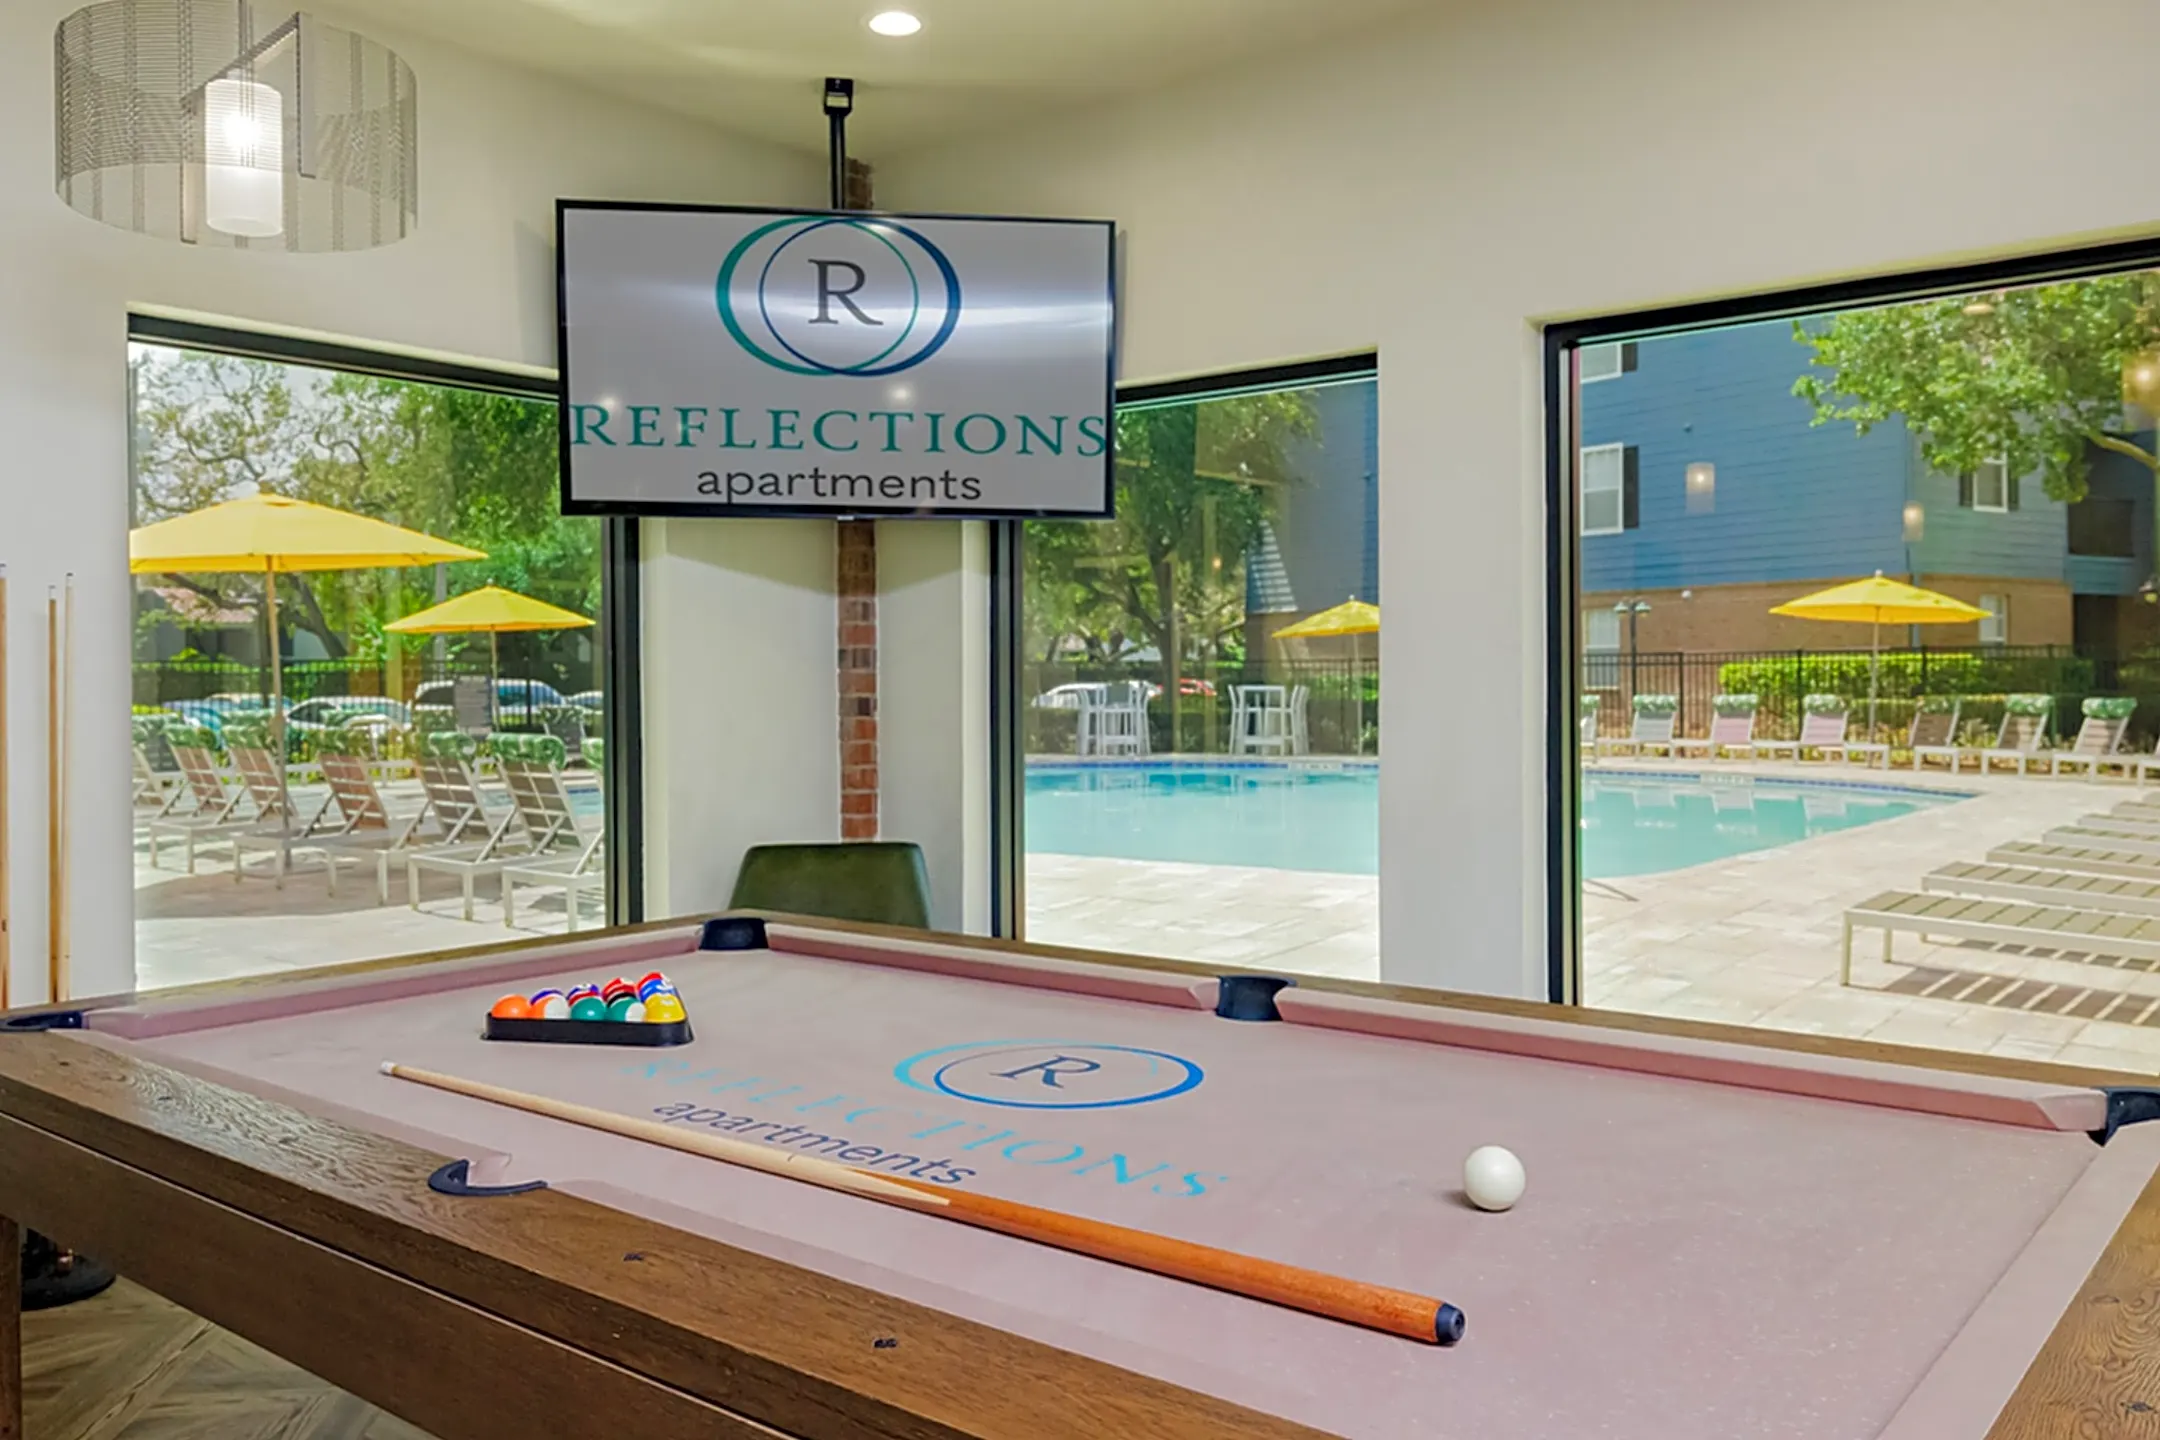 Reflections Apartments - Per Bed Lease - Tampa, FL